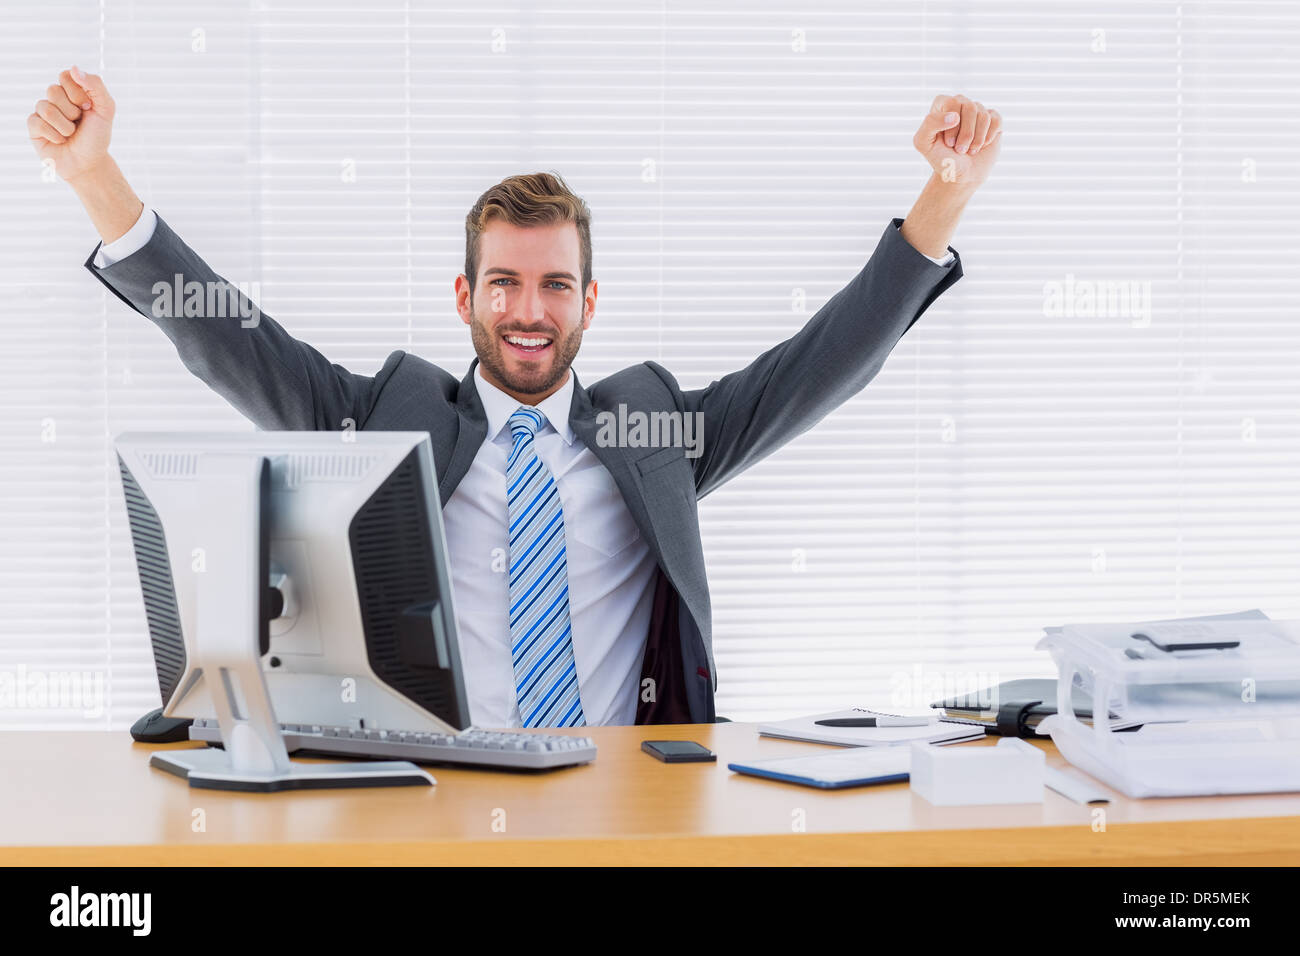 Cheerful businessman clenching fist at office desk Stock Photo